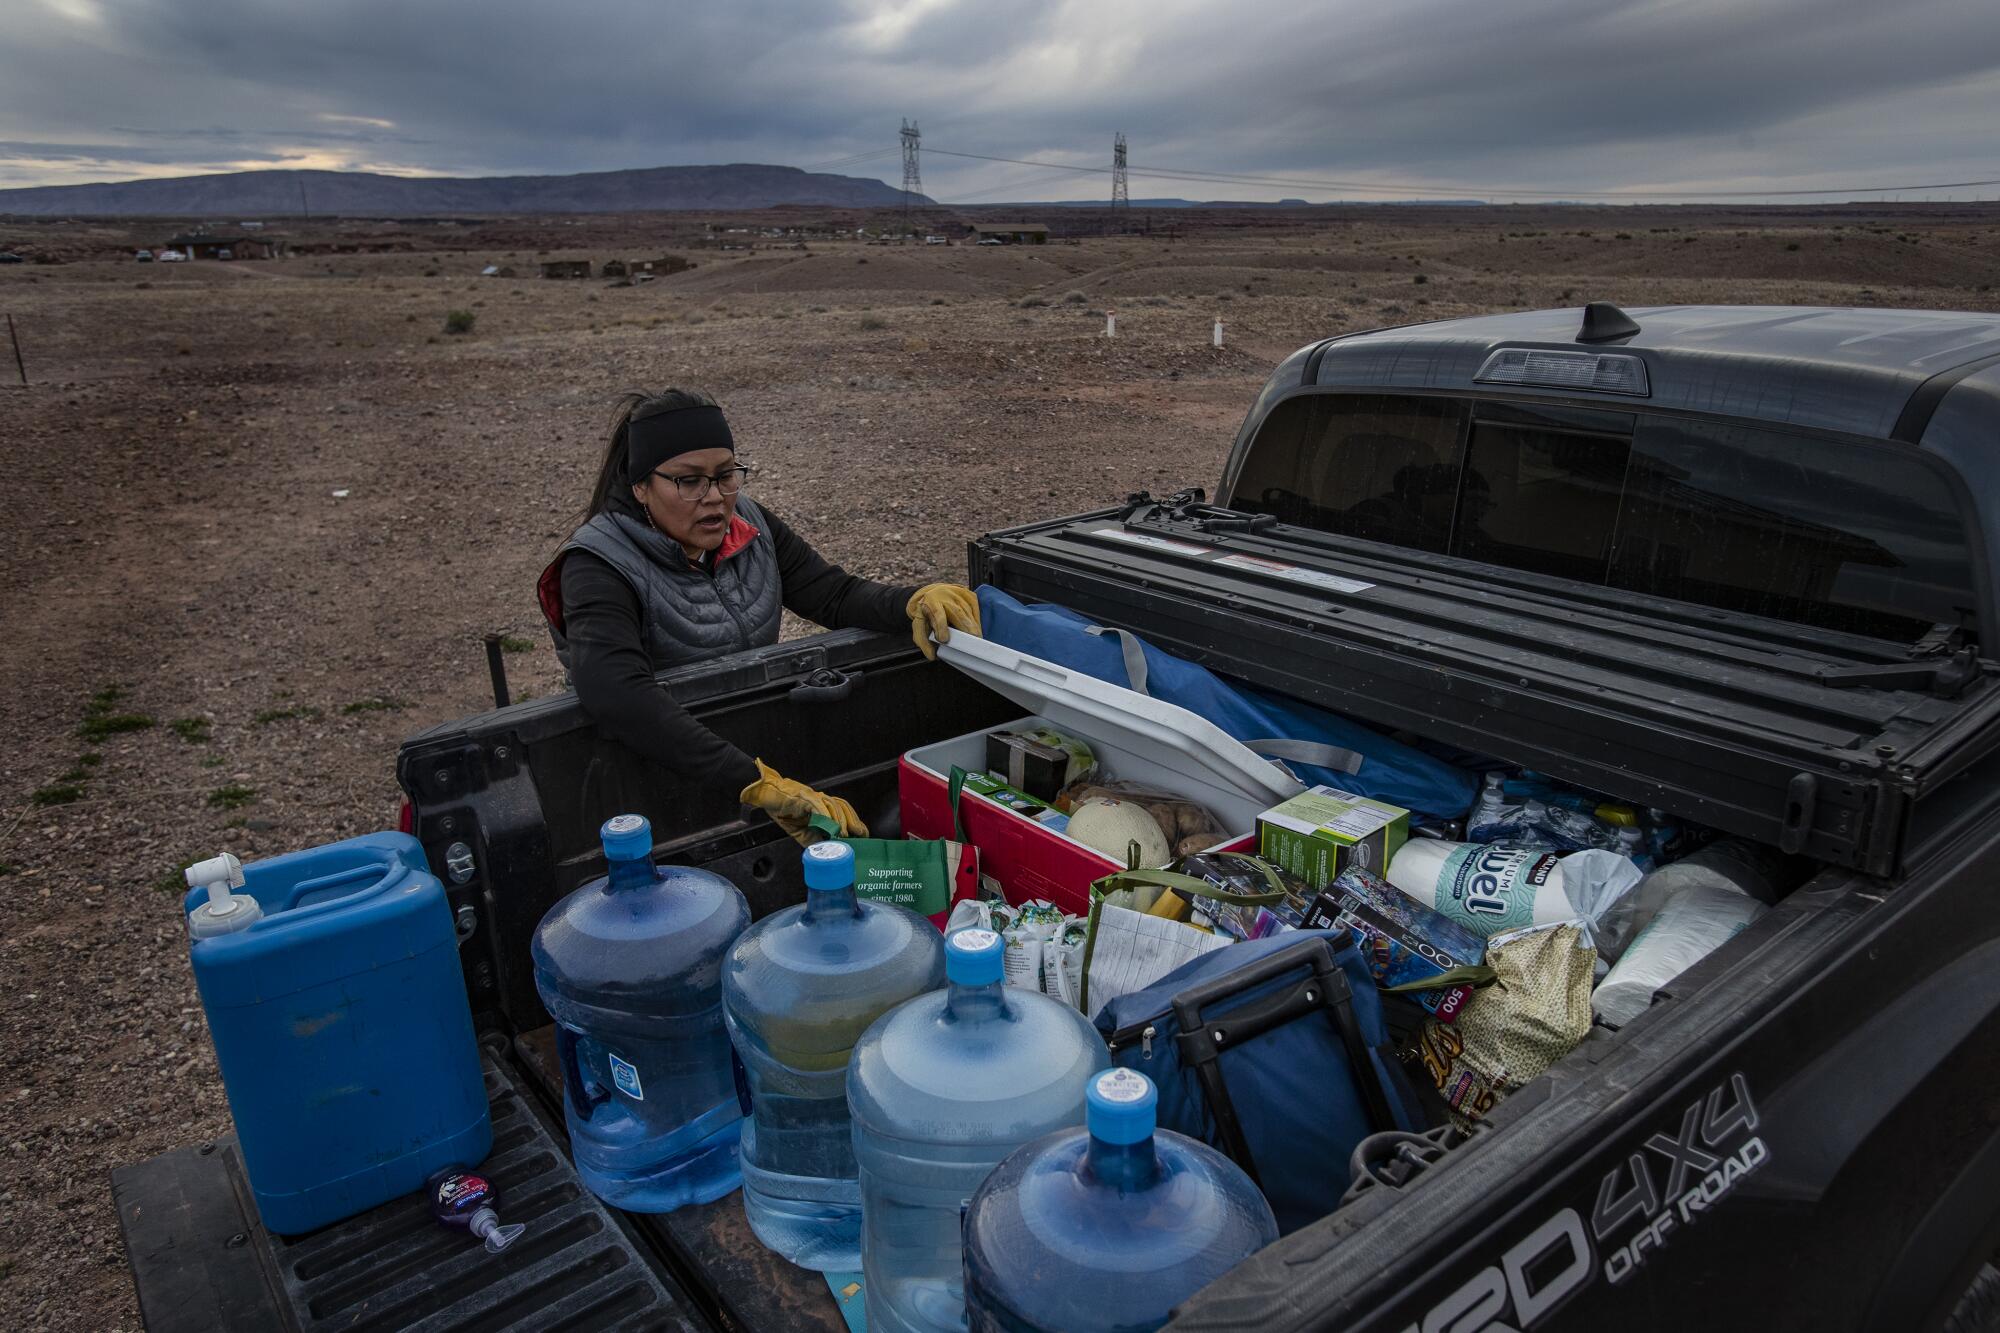 A woman unpacks water jugs and other supplies from the bed of a pickup truck.